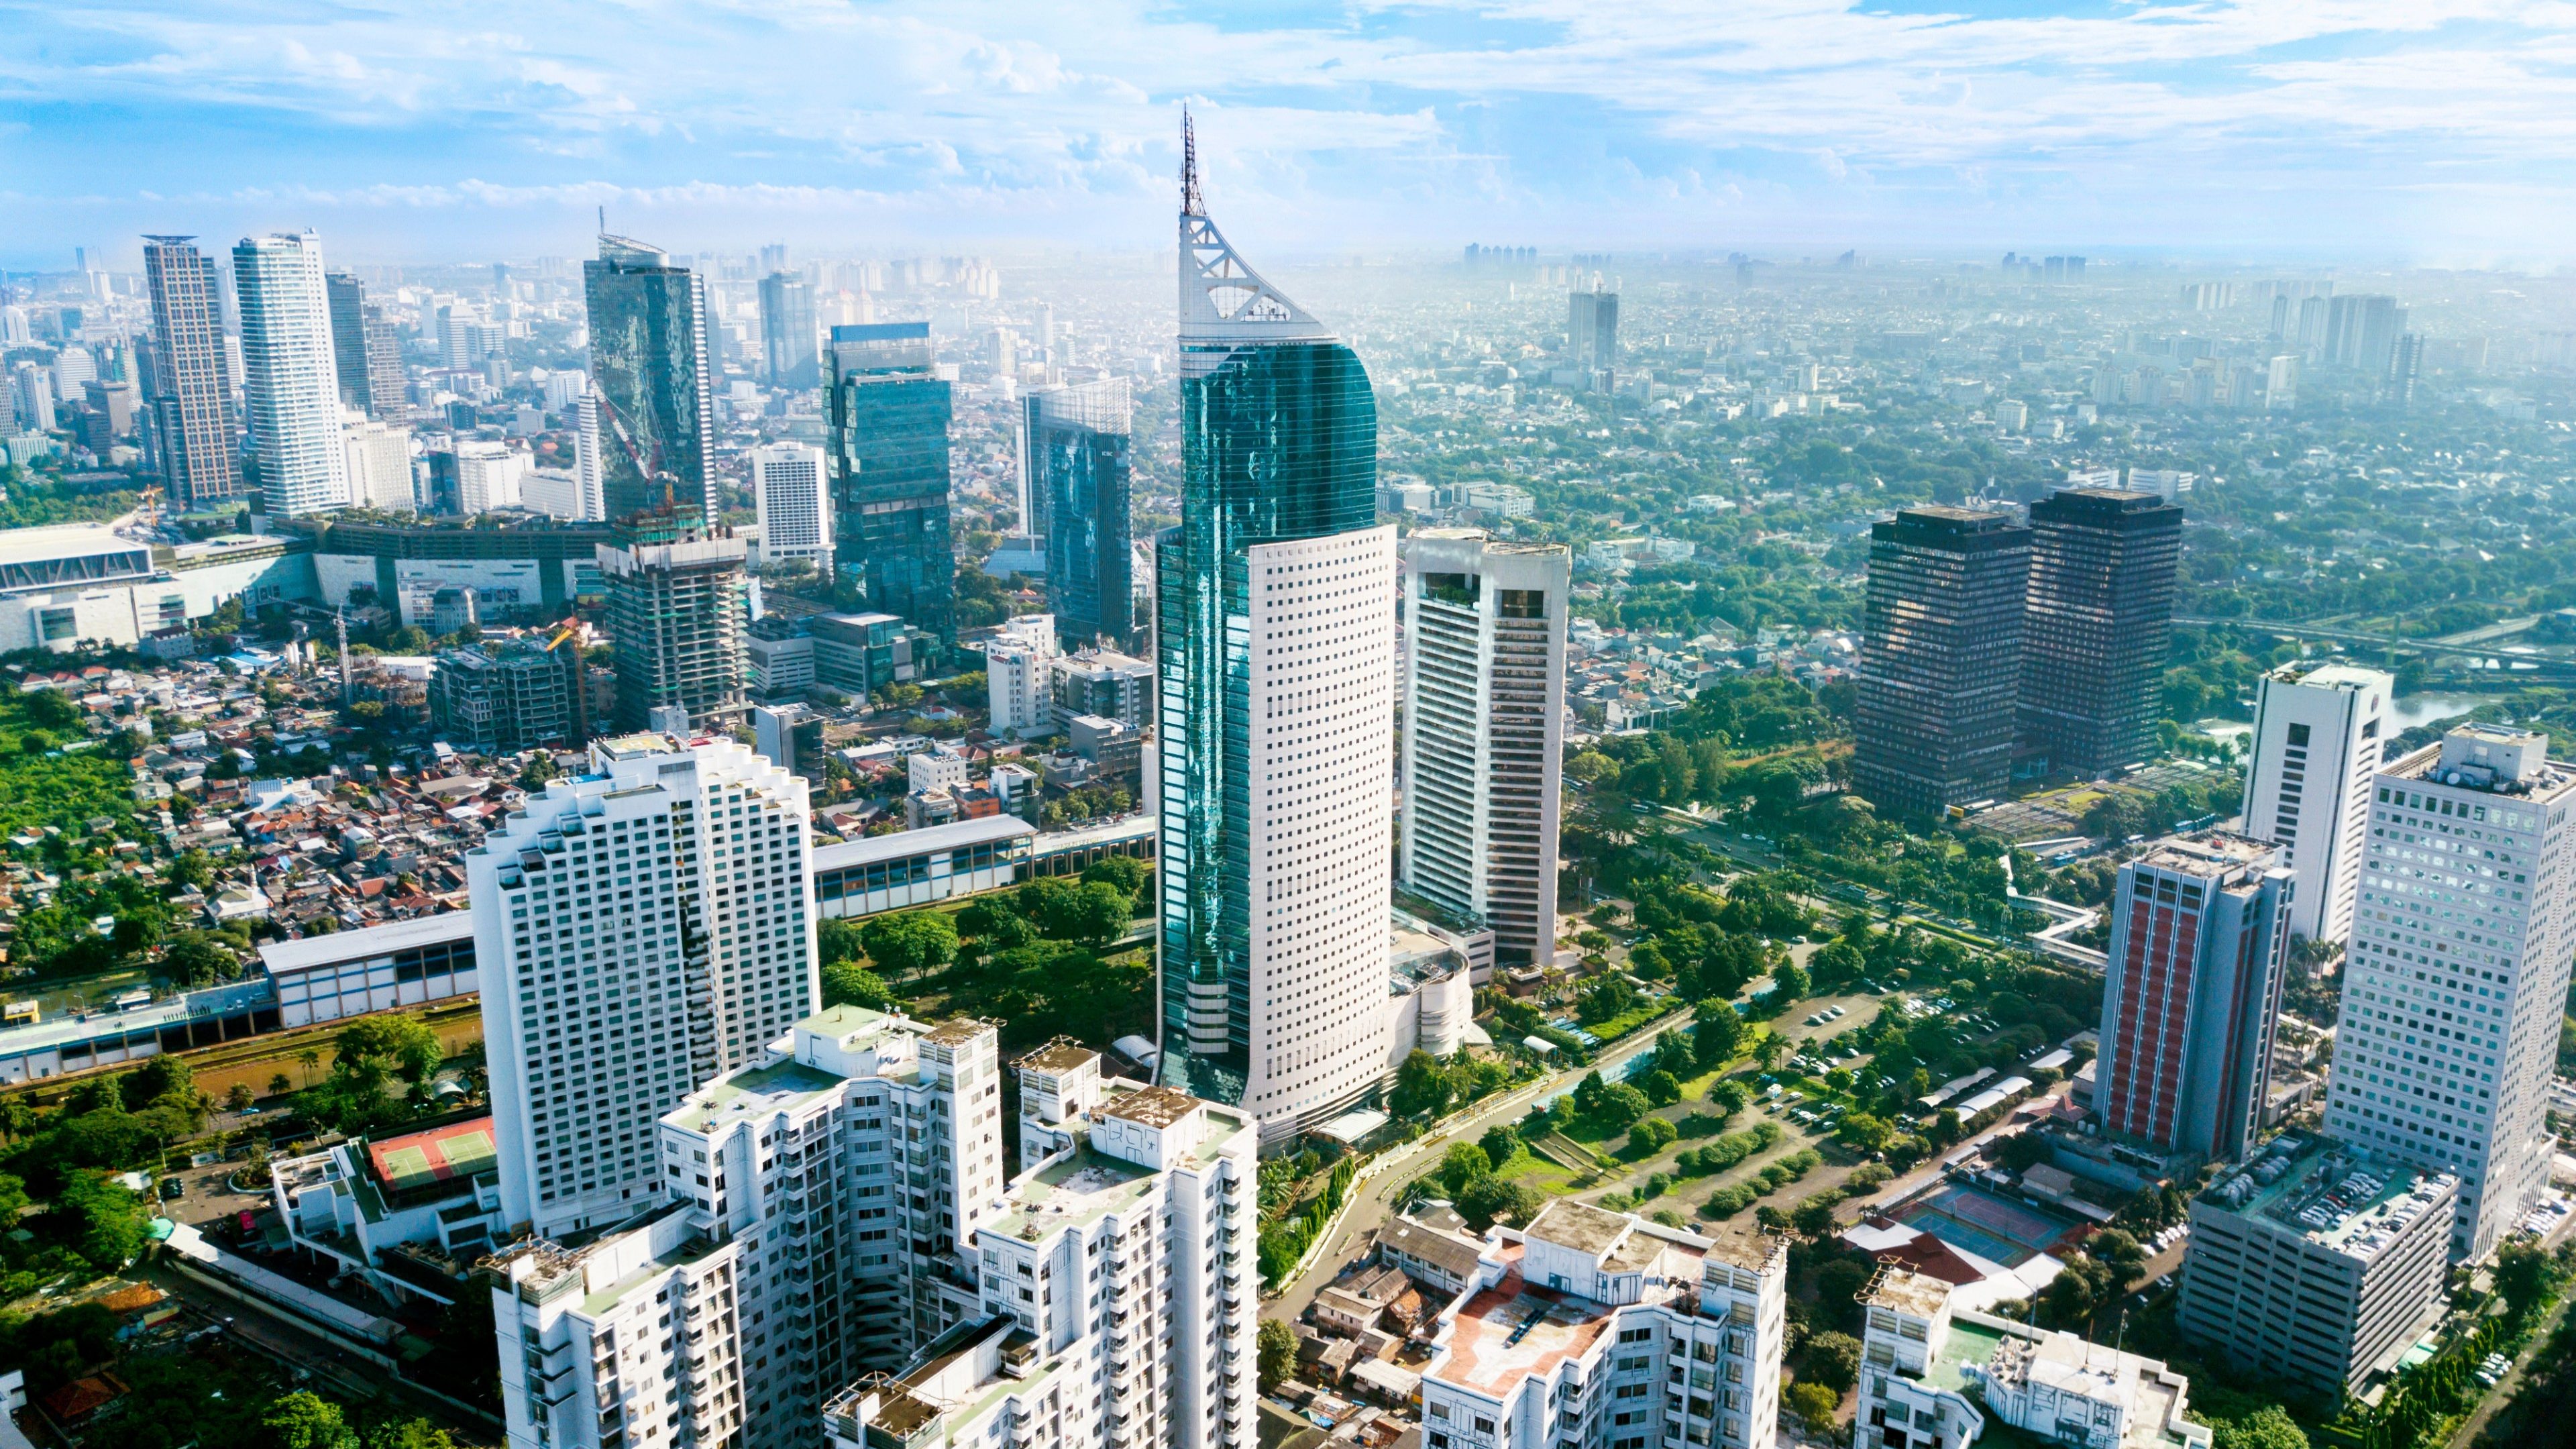 March 12, 2018: Aerial photo of iconic BNI 46 Tower located in South Jakarta Central Business District, Indonesia